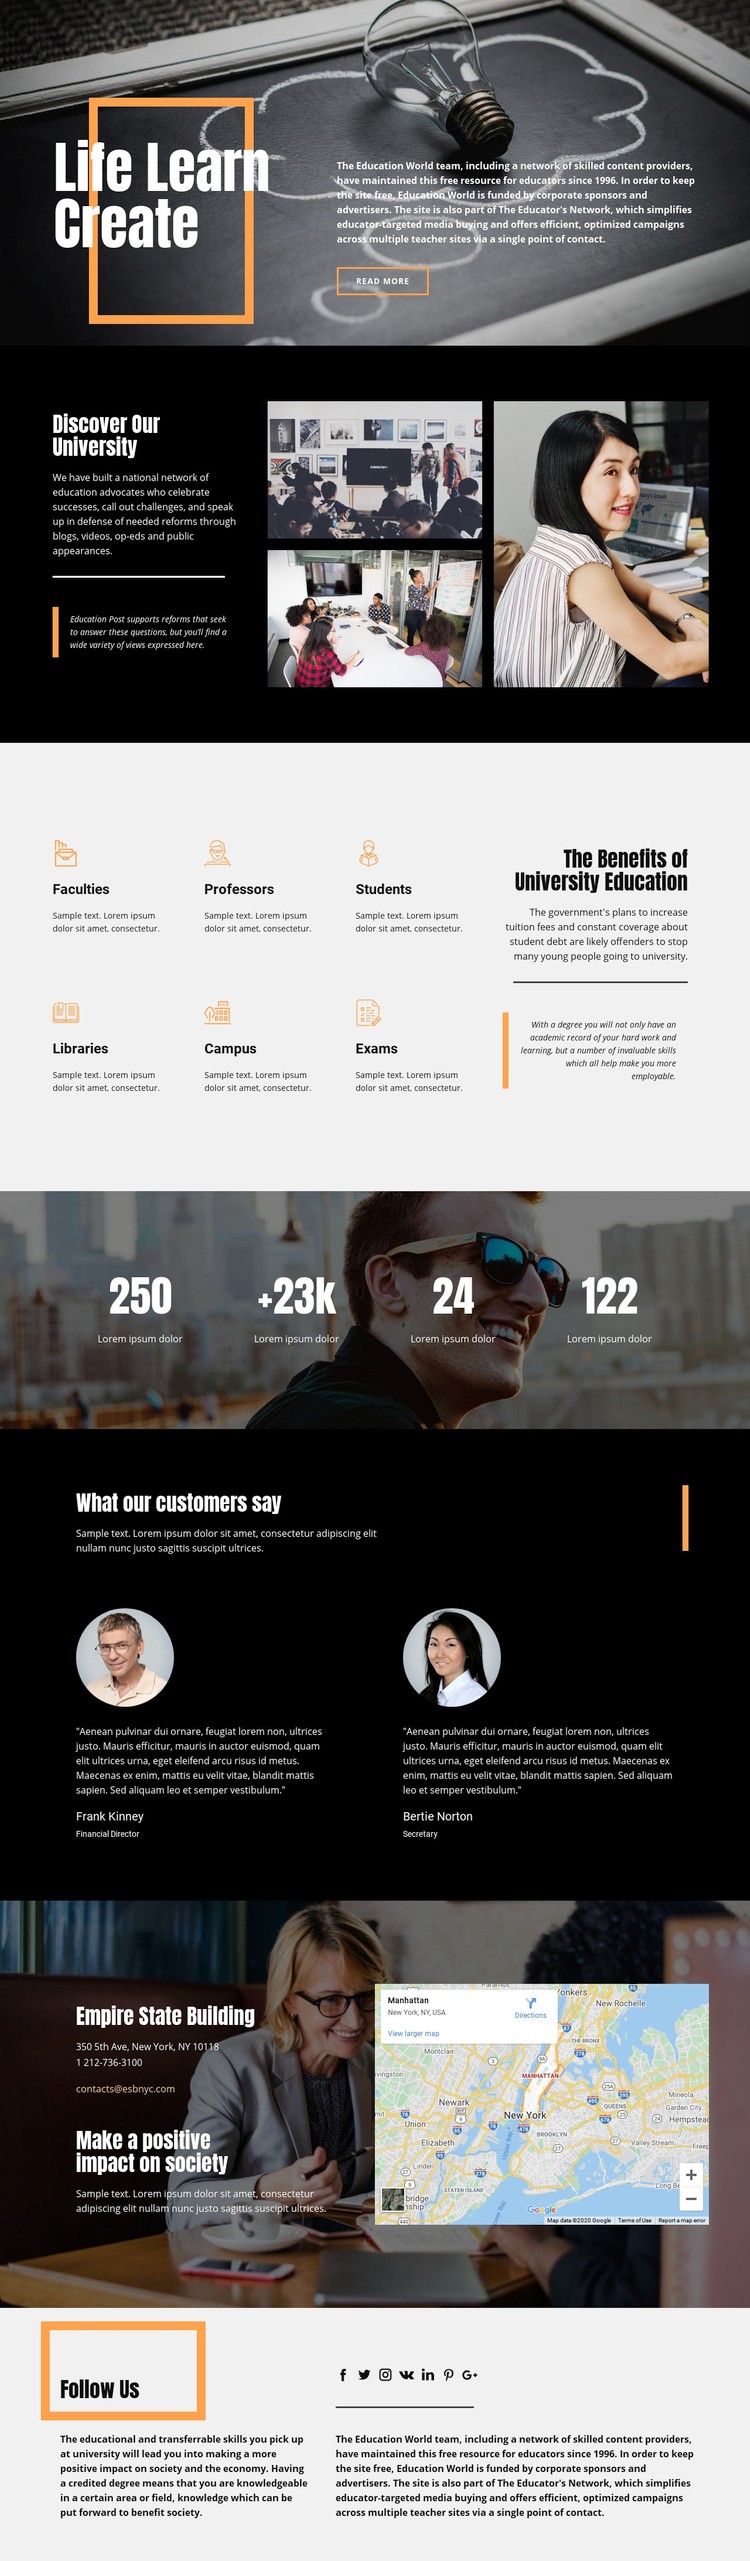 Discover highs of education Webflow Template Alternative